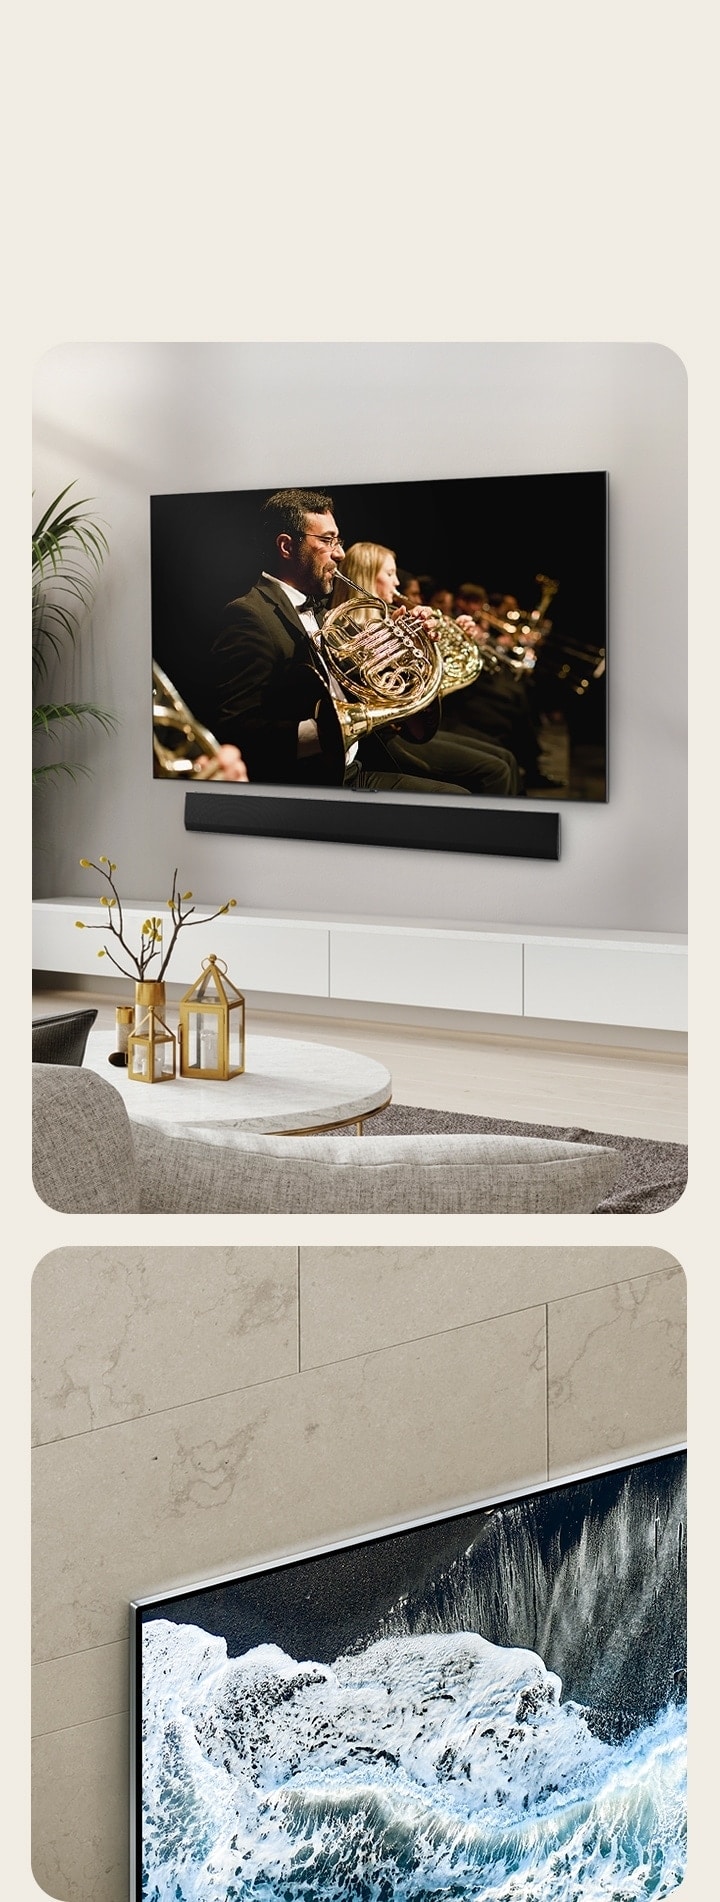 LG OLED TV, OLED G4 within an angled of perspective against a marbled wall showing how it merges against the wall.   LG OLED TV, OLED G4 and an LG Soundbar in a clean living space flat against the wall with an orchestral performance playing on screen. 